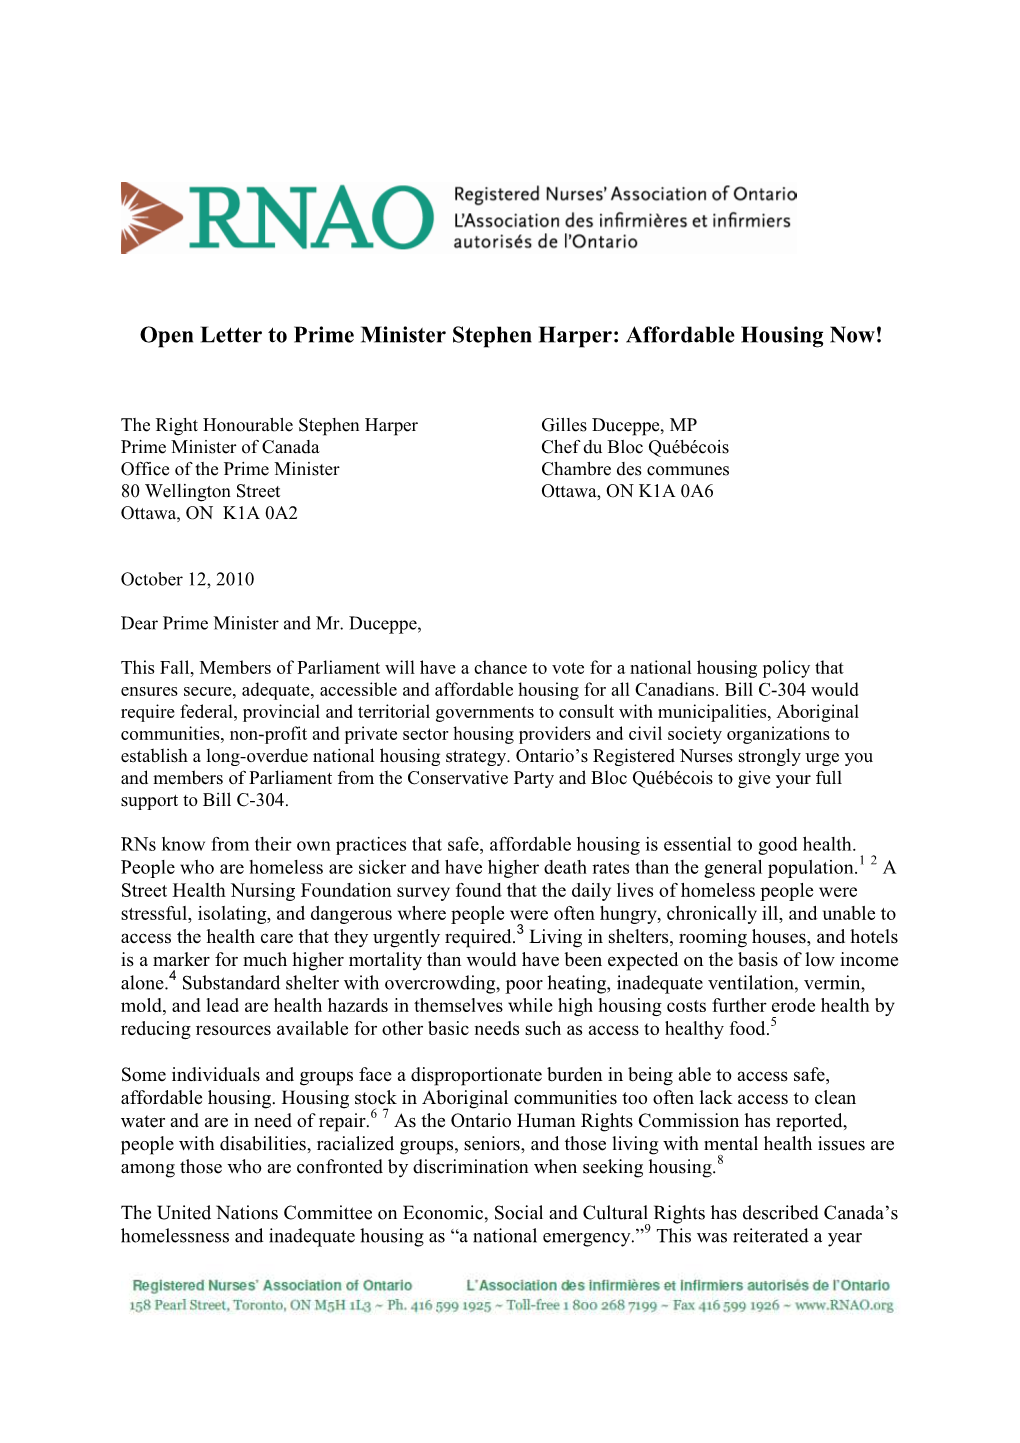 RNAO Open Letter to Harper Duceppe Re Affordable Housing